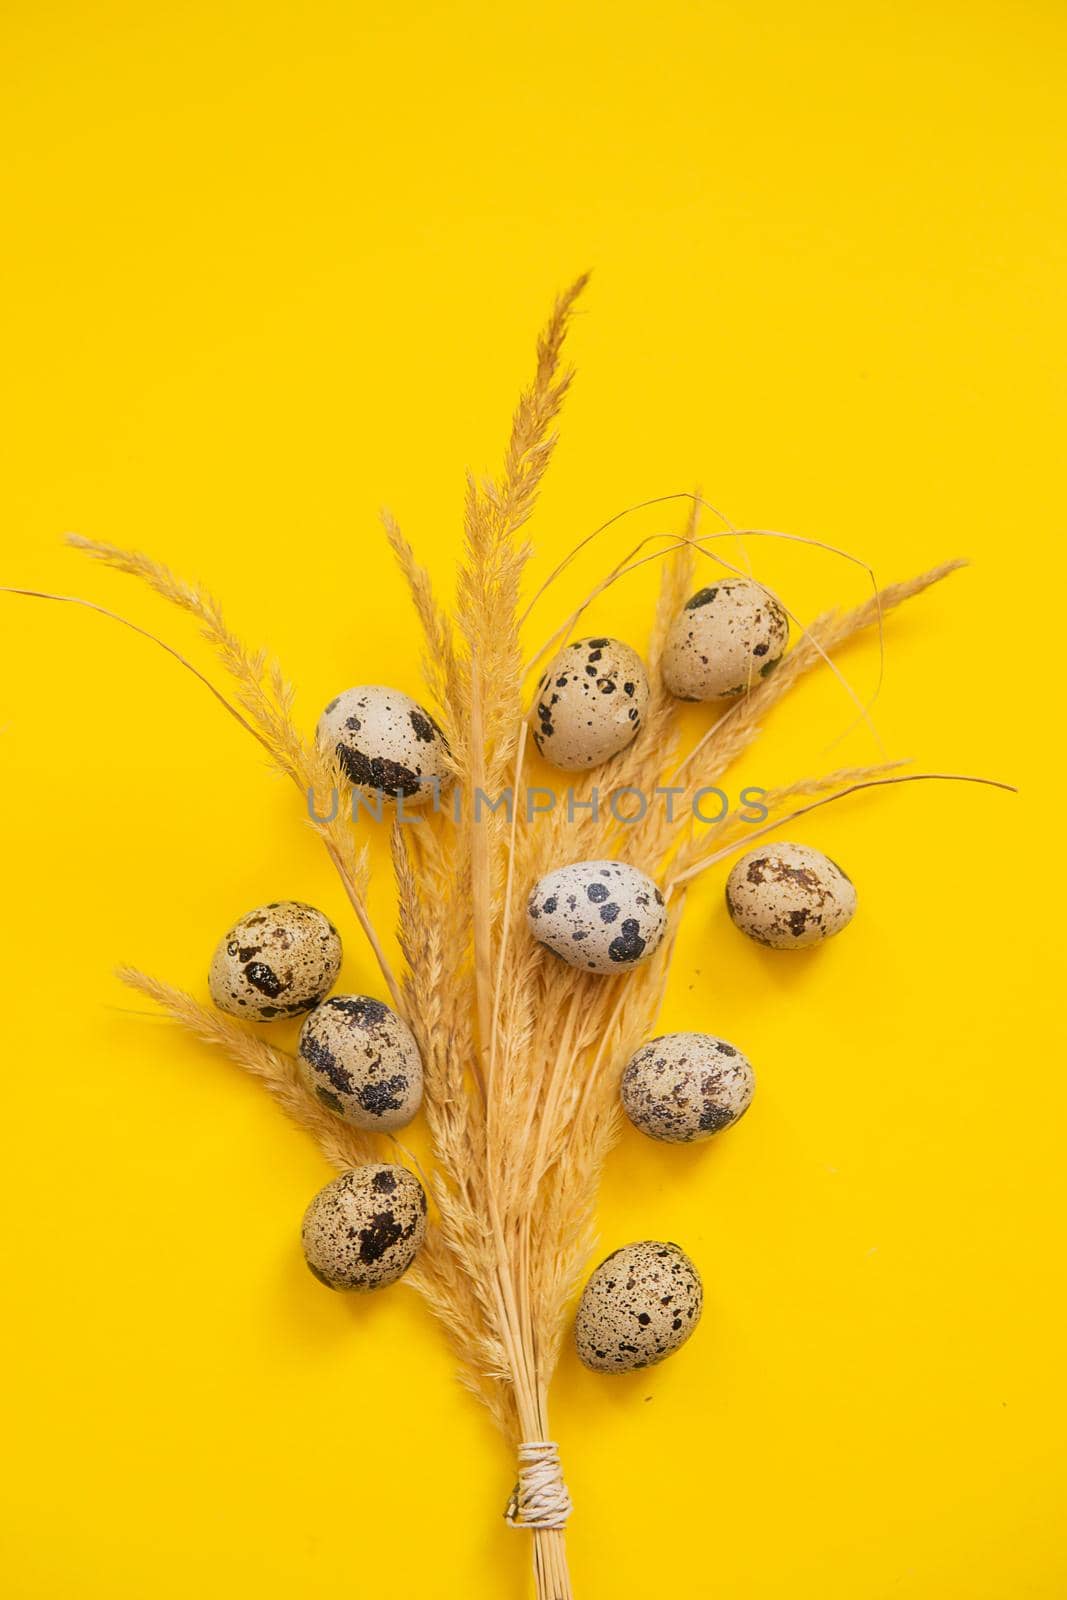 Easter background, quail eggs on a yellow background, decorated with natural botanical elements, flat lay, view from above by Annu1tochka